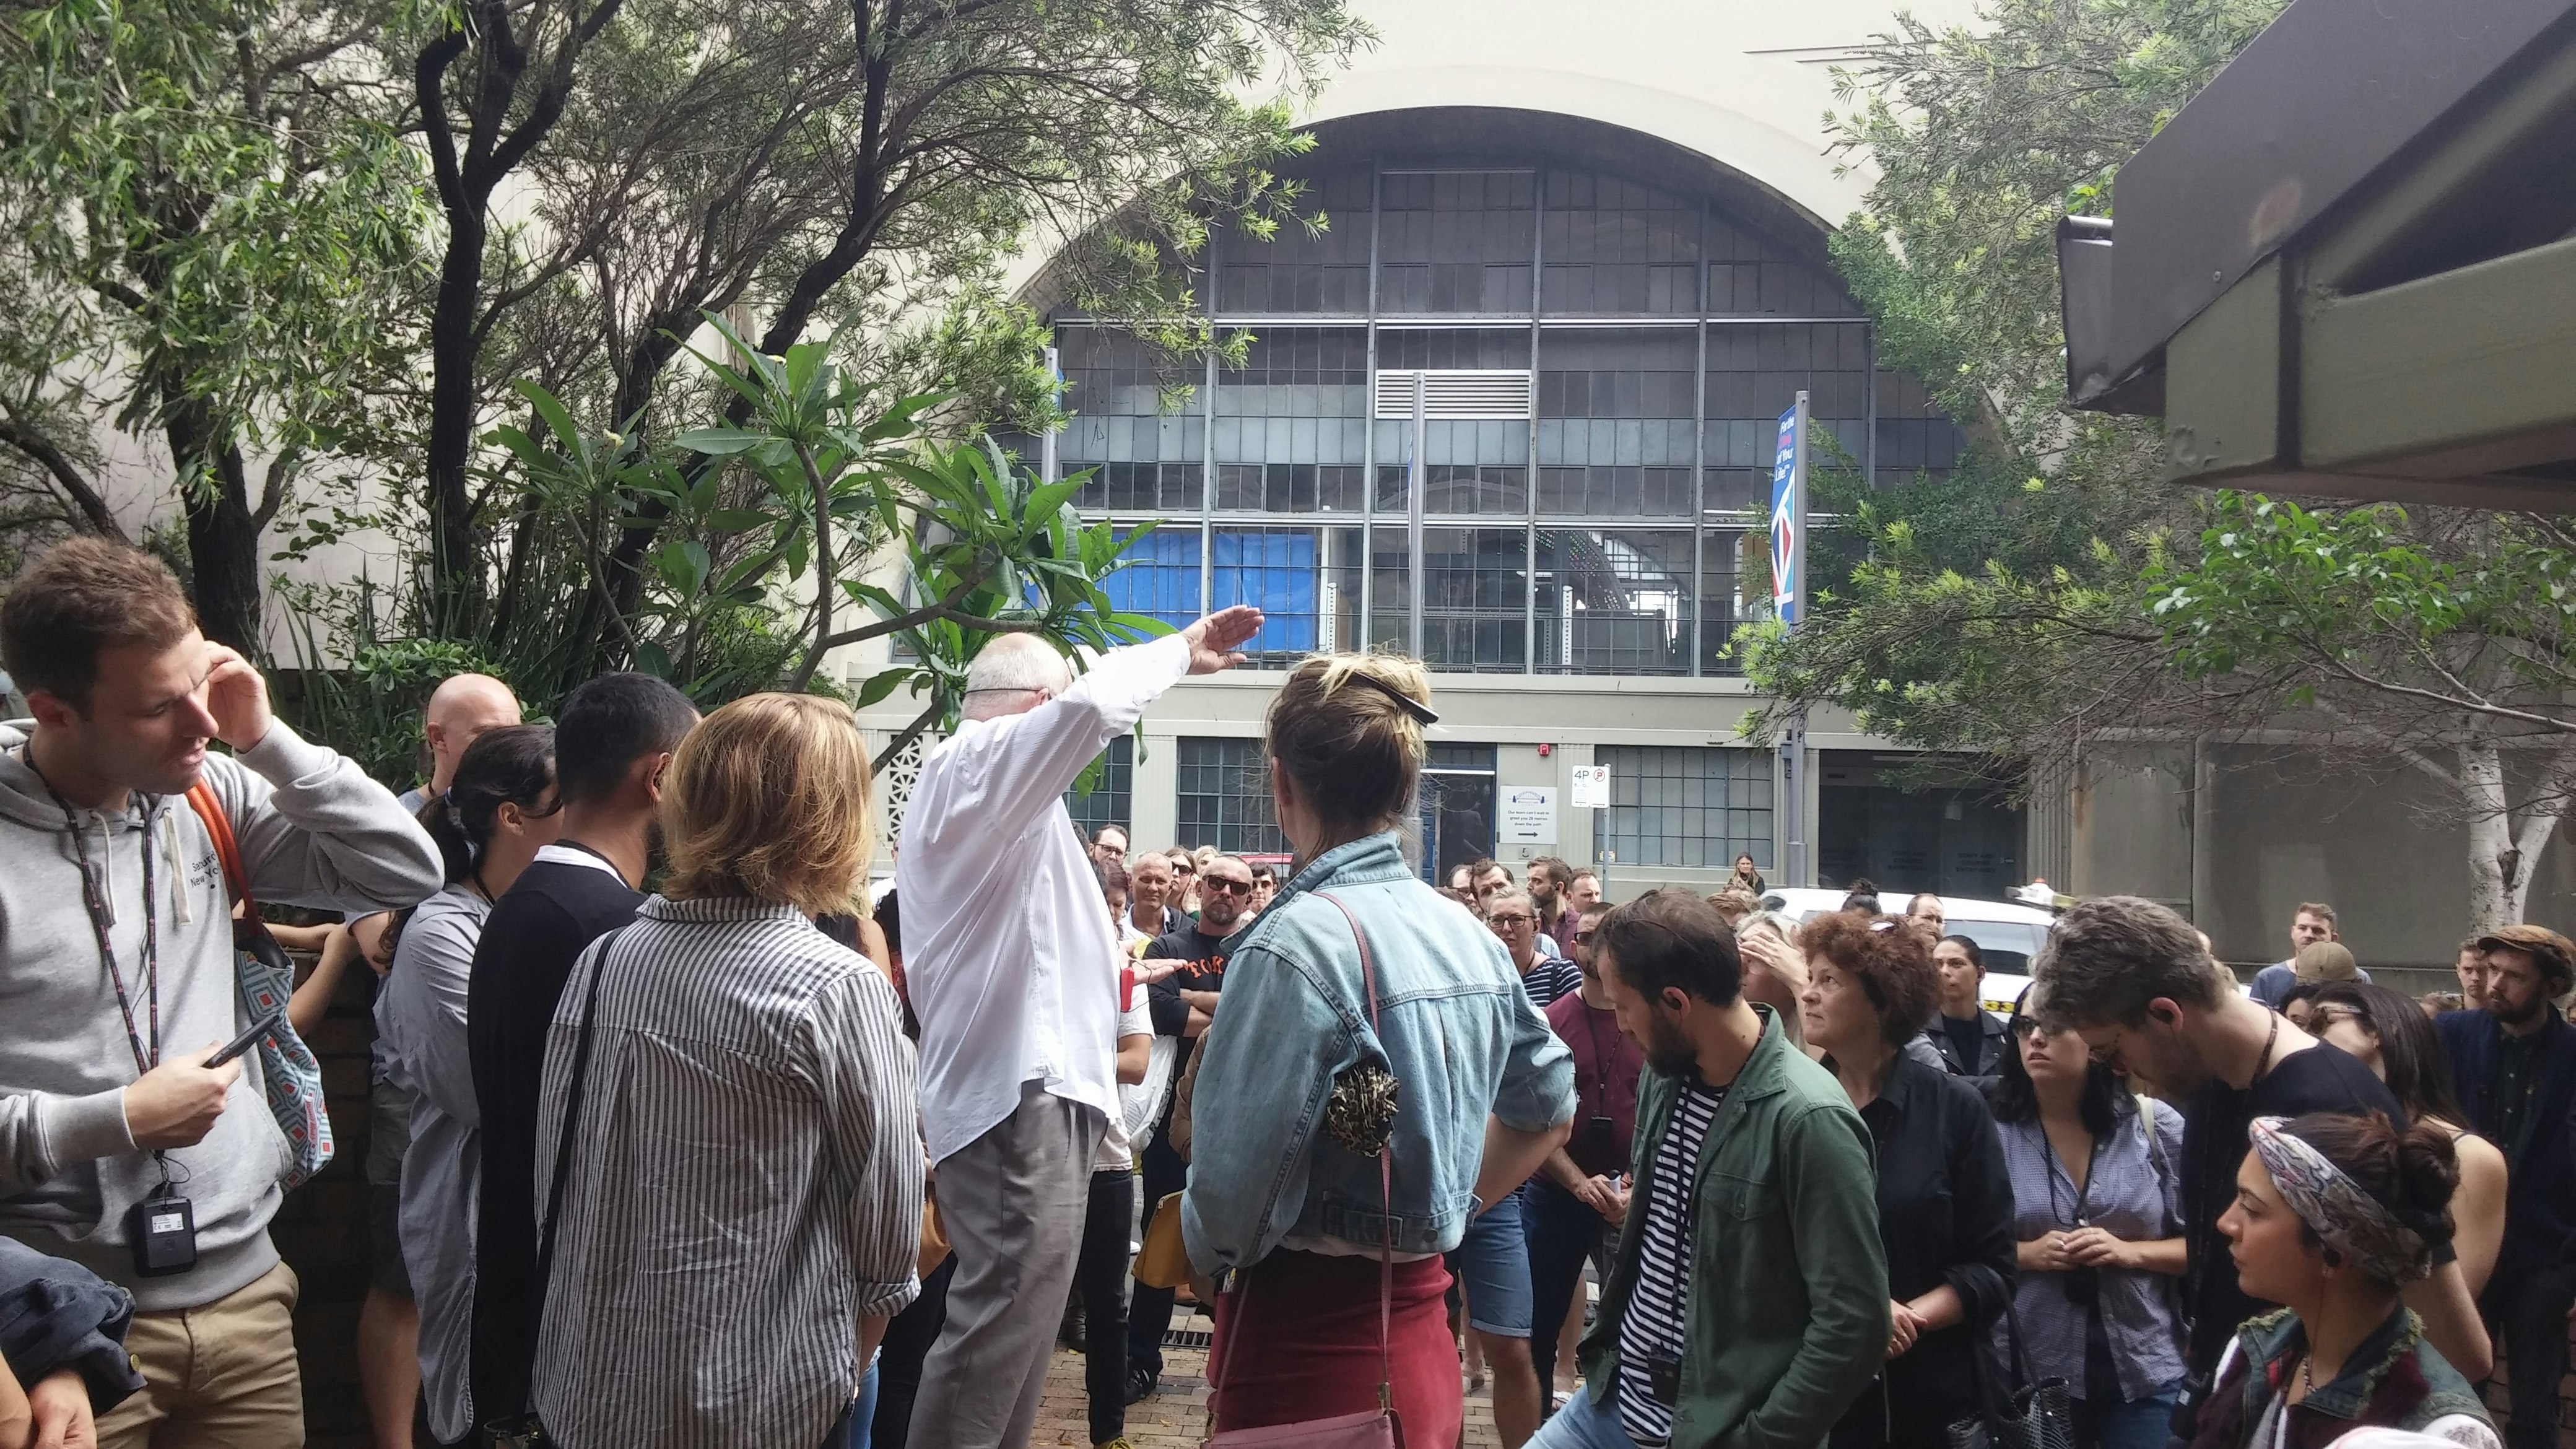 A crowd standing in an outdoor urban space, listening to an elderly male-presenting figure in a white dress shirt and grey trousers present a talk.